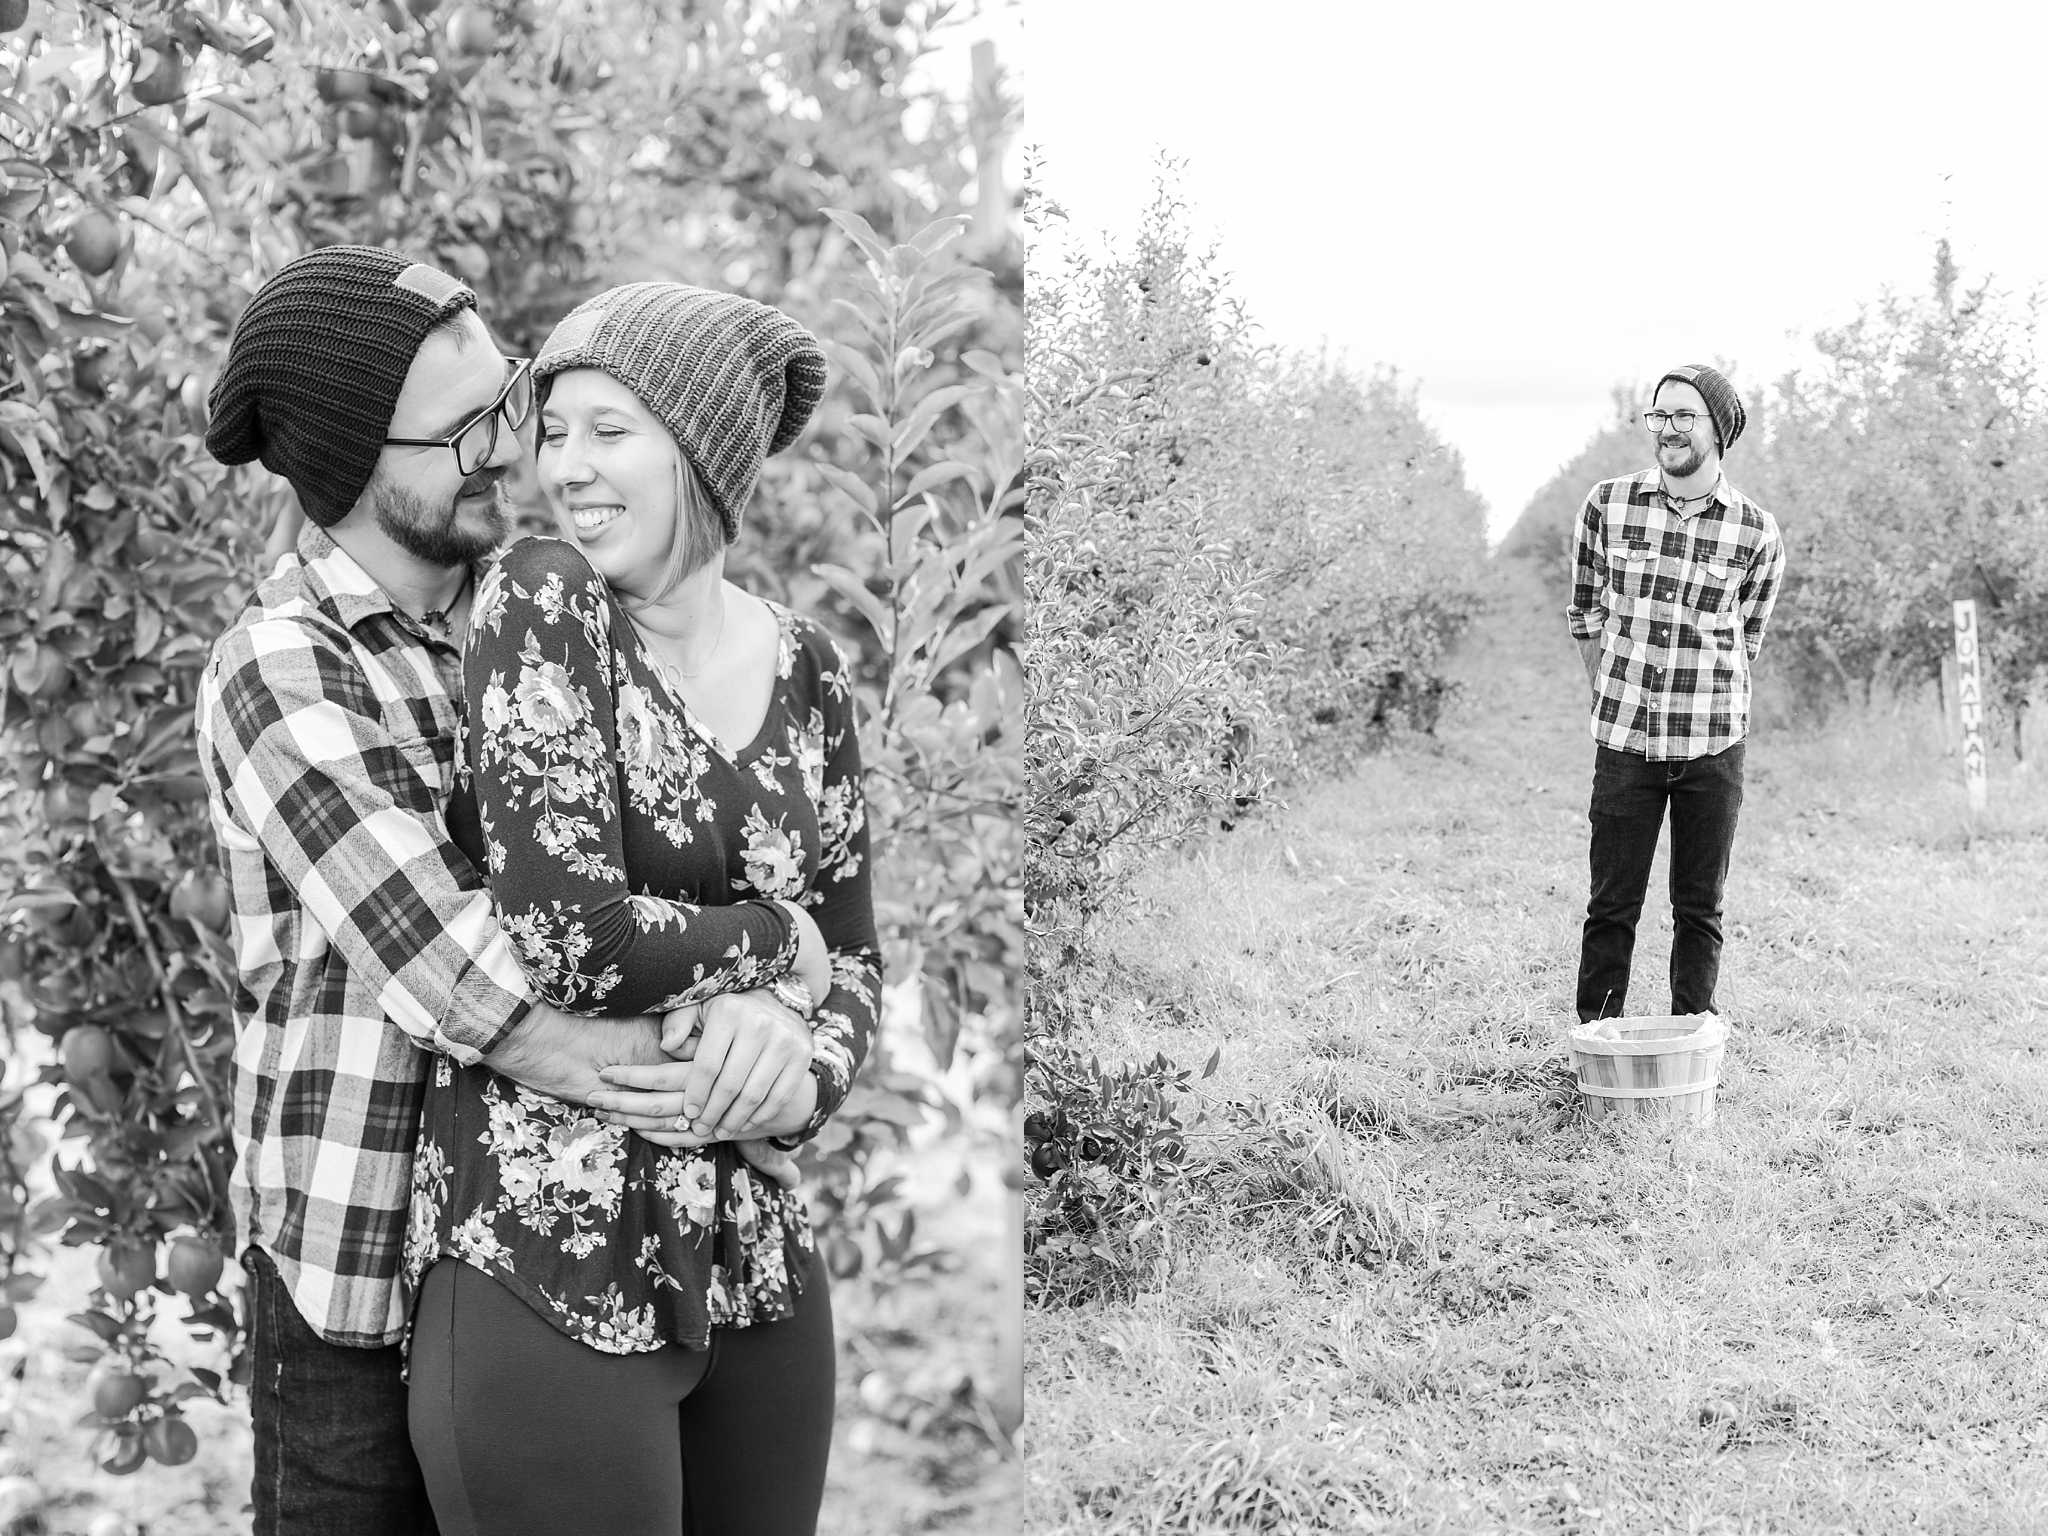 playful-fall-engagement-photos-at-hy's-cider-mill-ochard-in-bruce-township-michigan-by-courtney-carolyn-photography_0017.jpg